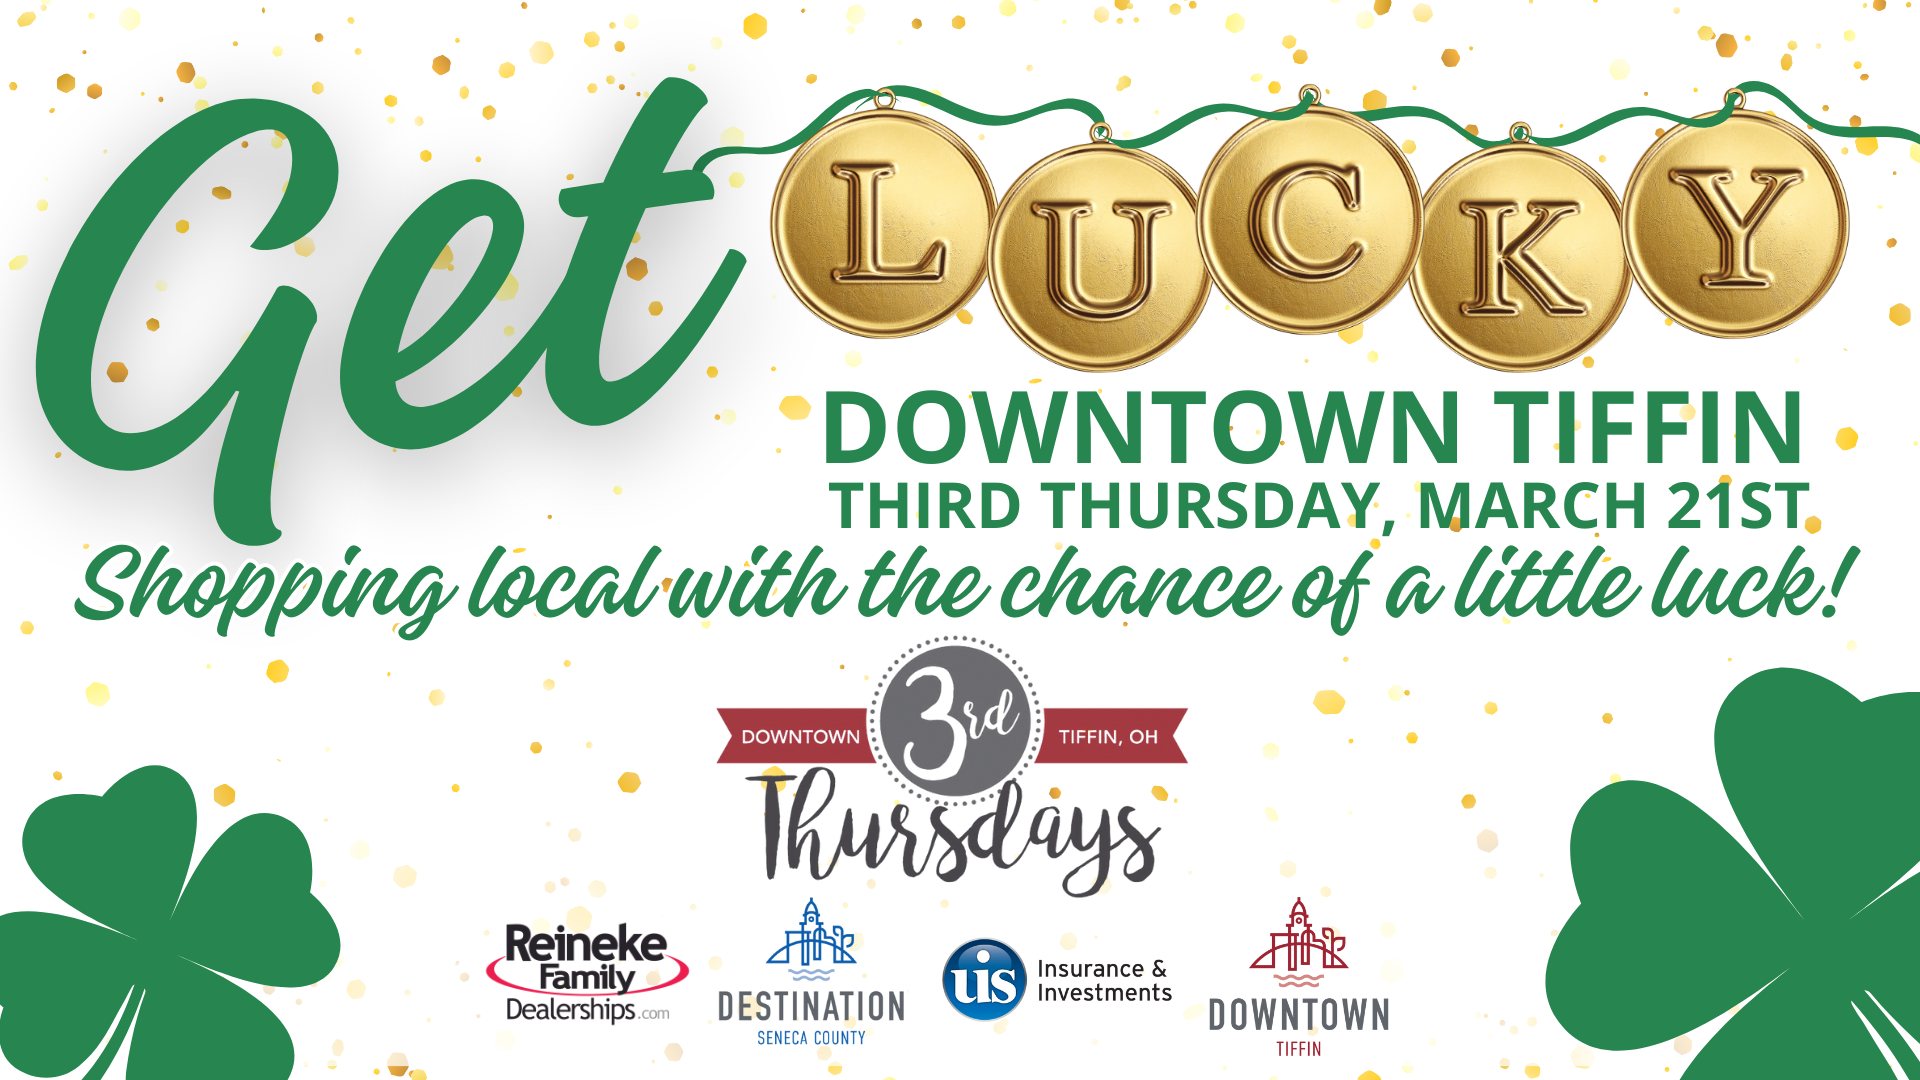 Get Lucky in Downtown Tiffin - Third Thursday